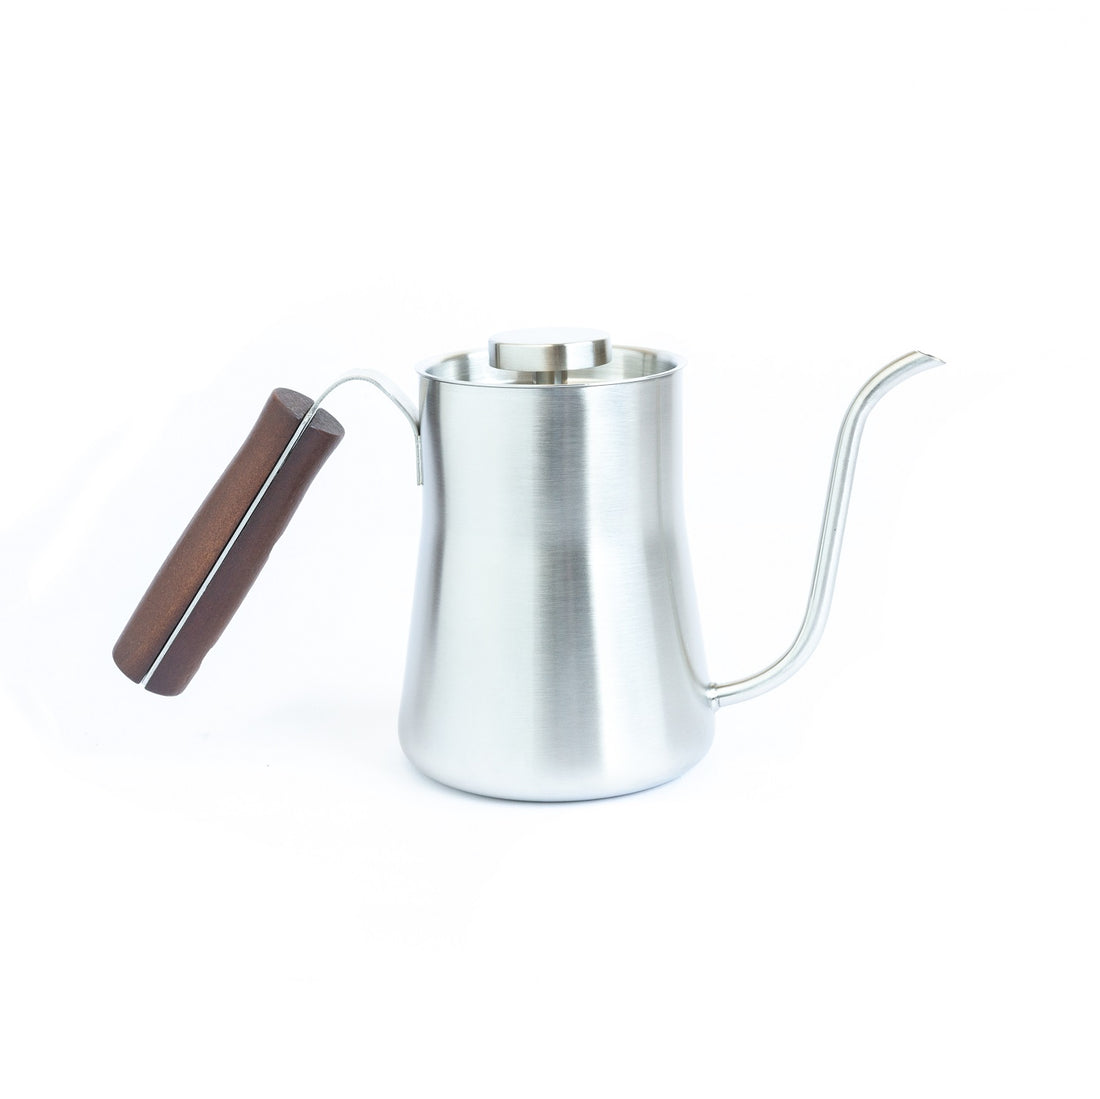 OXO Brew Stainless Steel Pour-Over Kettle with Thermometer - Winestuff